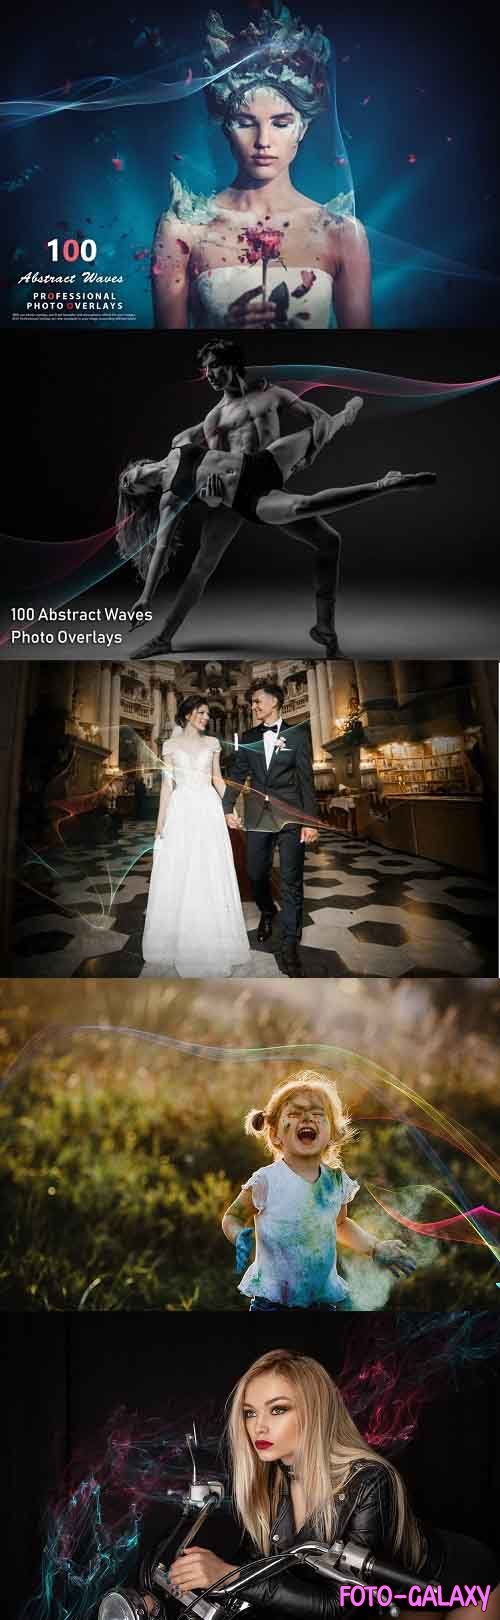 100 Abstract Waves Photo Overlays - 992746